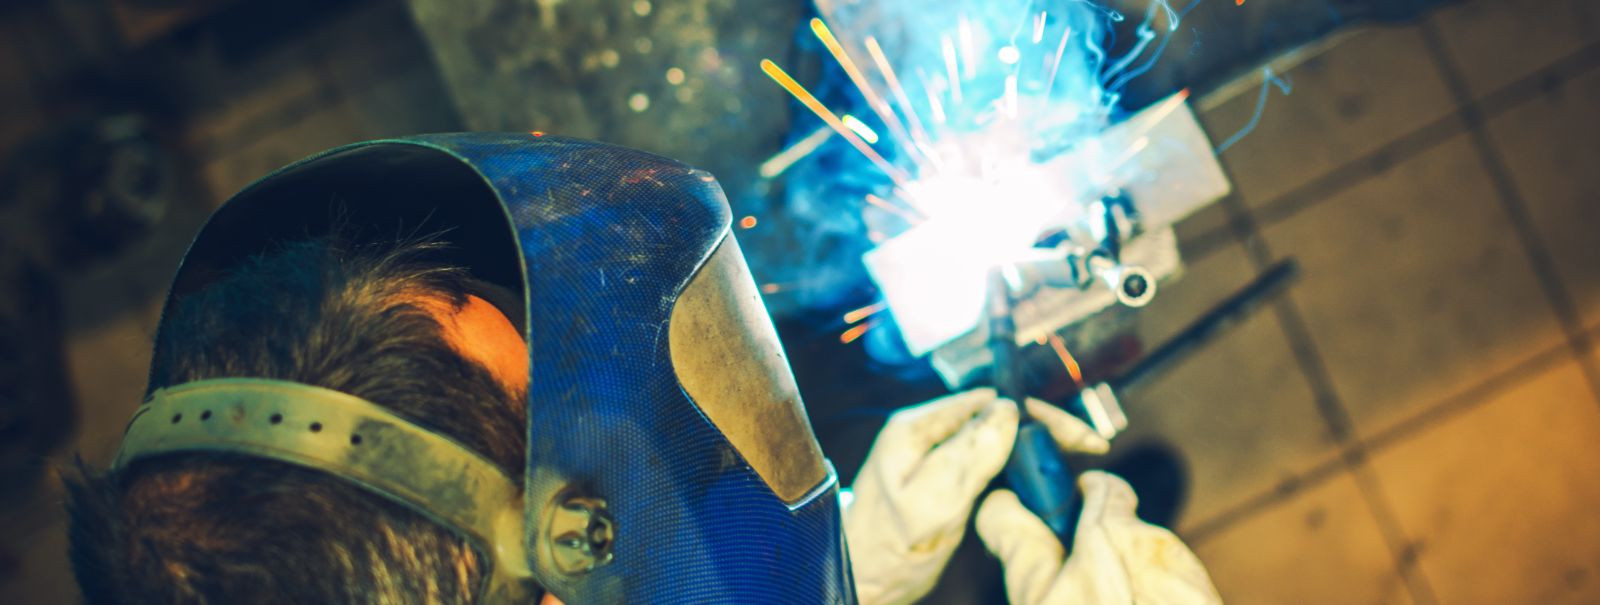 Tungsten Inert Gas (TIG) welding, also known as Gas Tungsten Arc Welding (GTAW), is a welding process that involves using a non-consumable tungsten electrode to